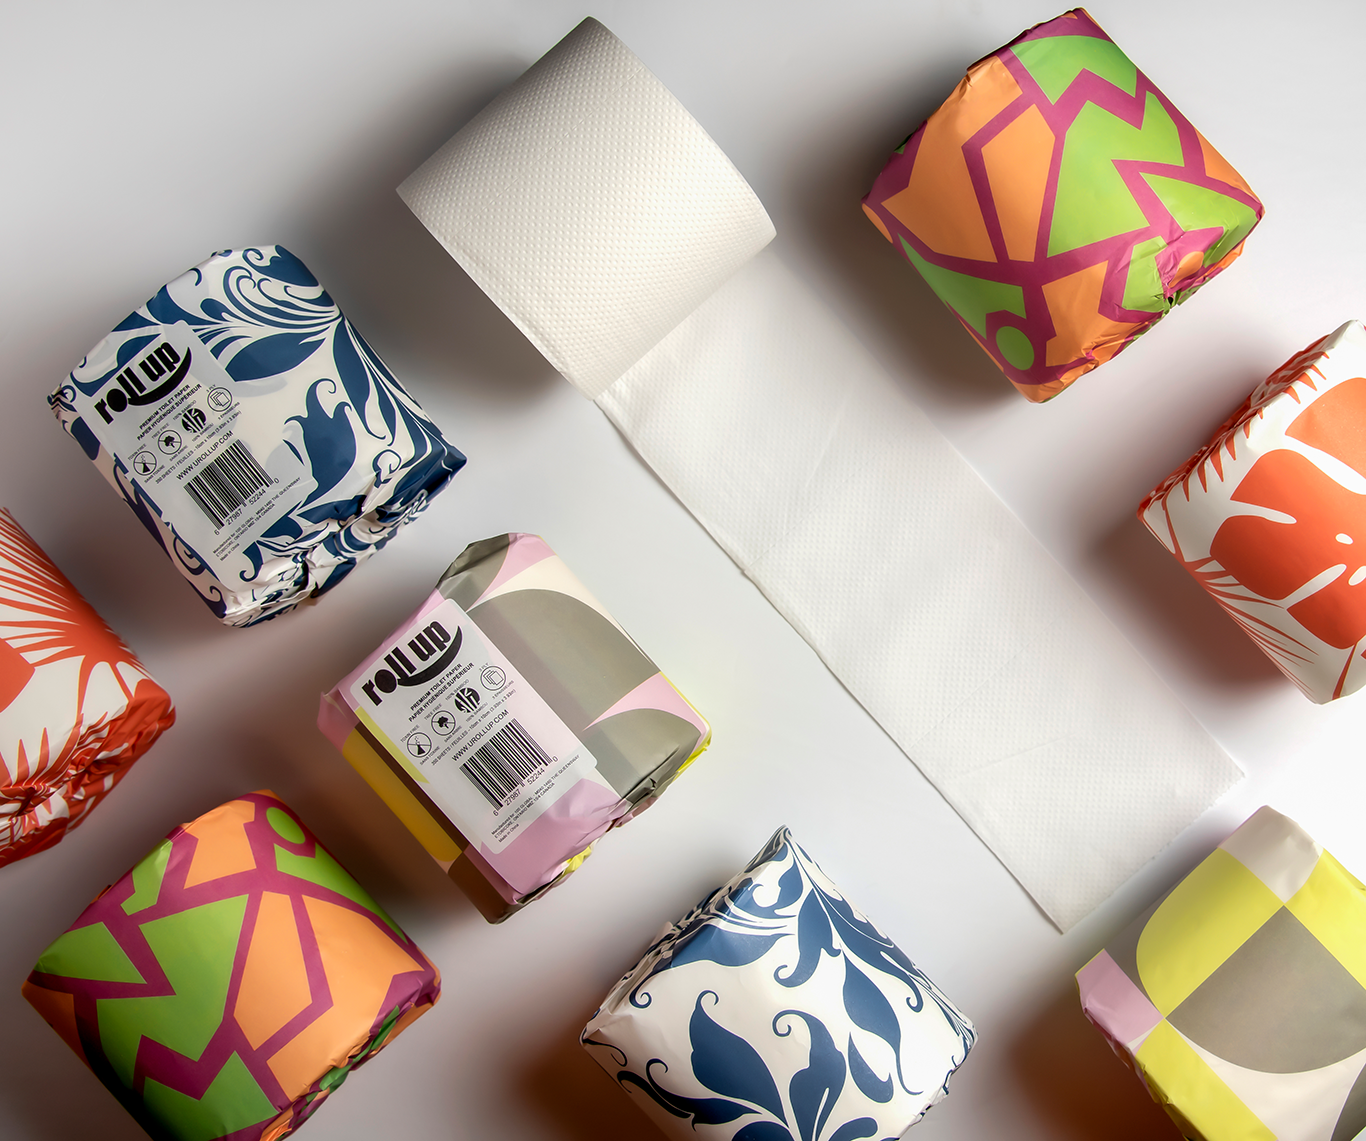 Toilet paper with colourful packaging